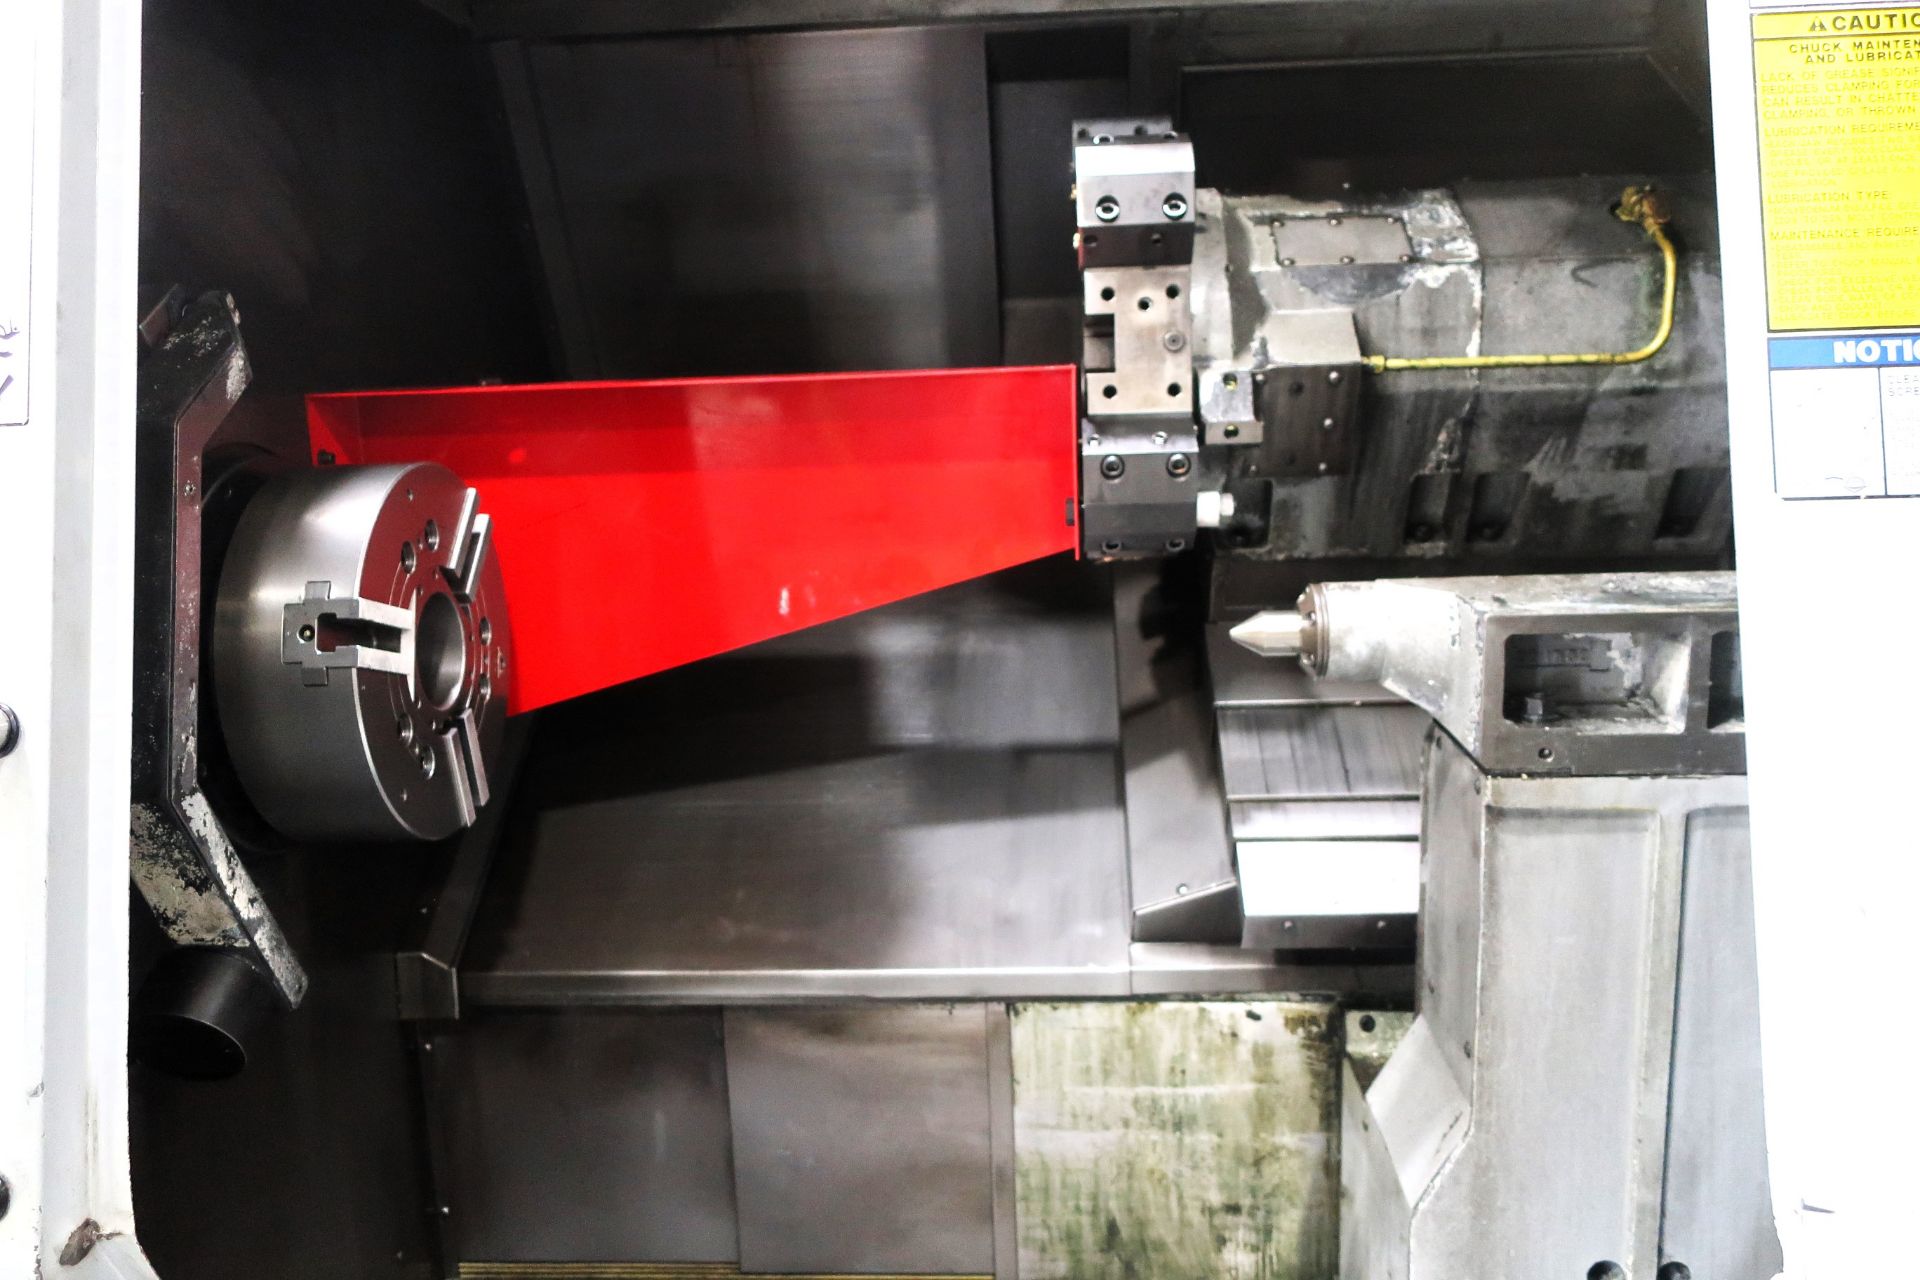 25.5"X40" Haas SL-40T 2-Axis Turning Center Lathe, S/N 73479, 2006 - Image 3 of 10